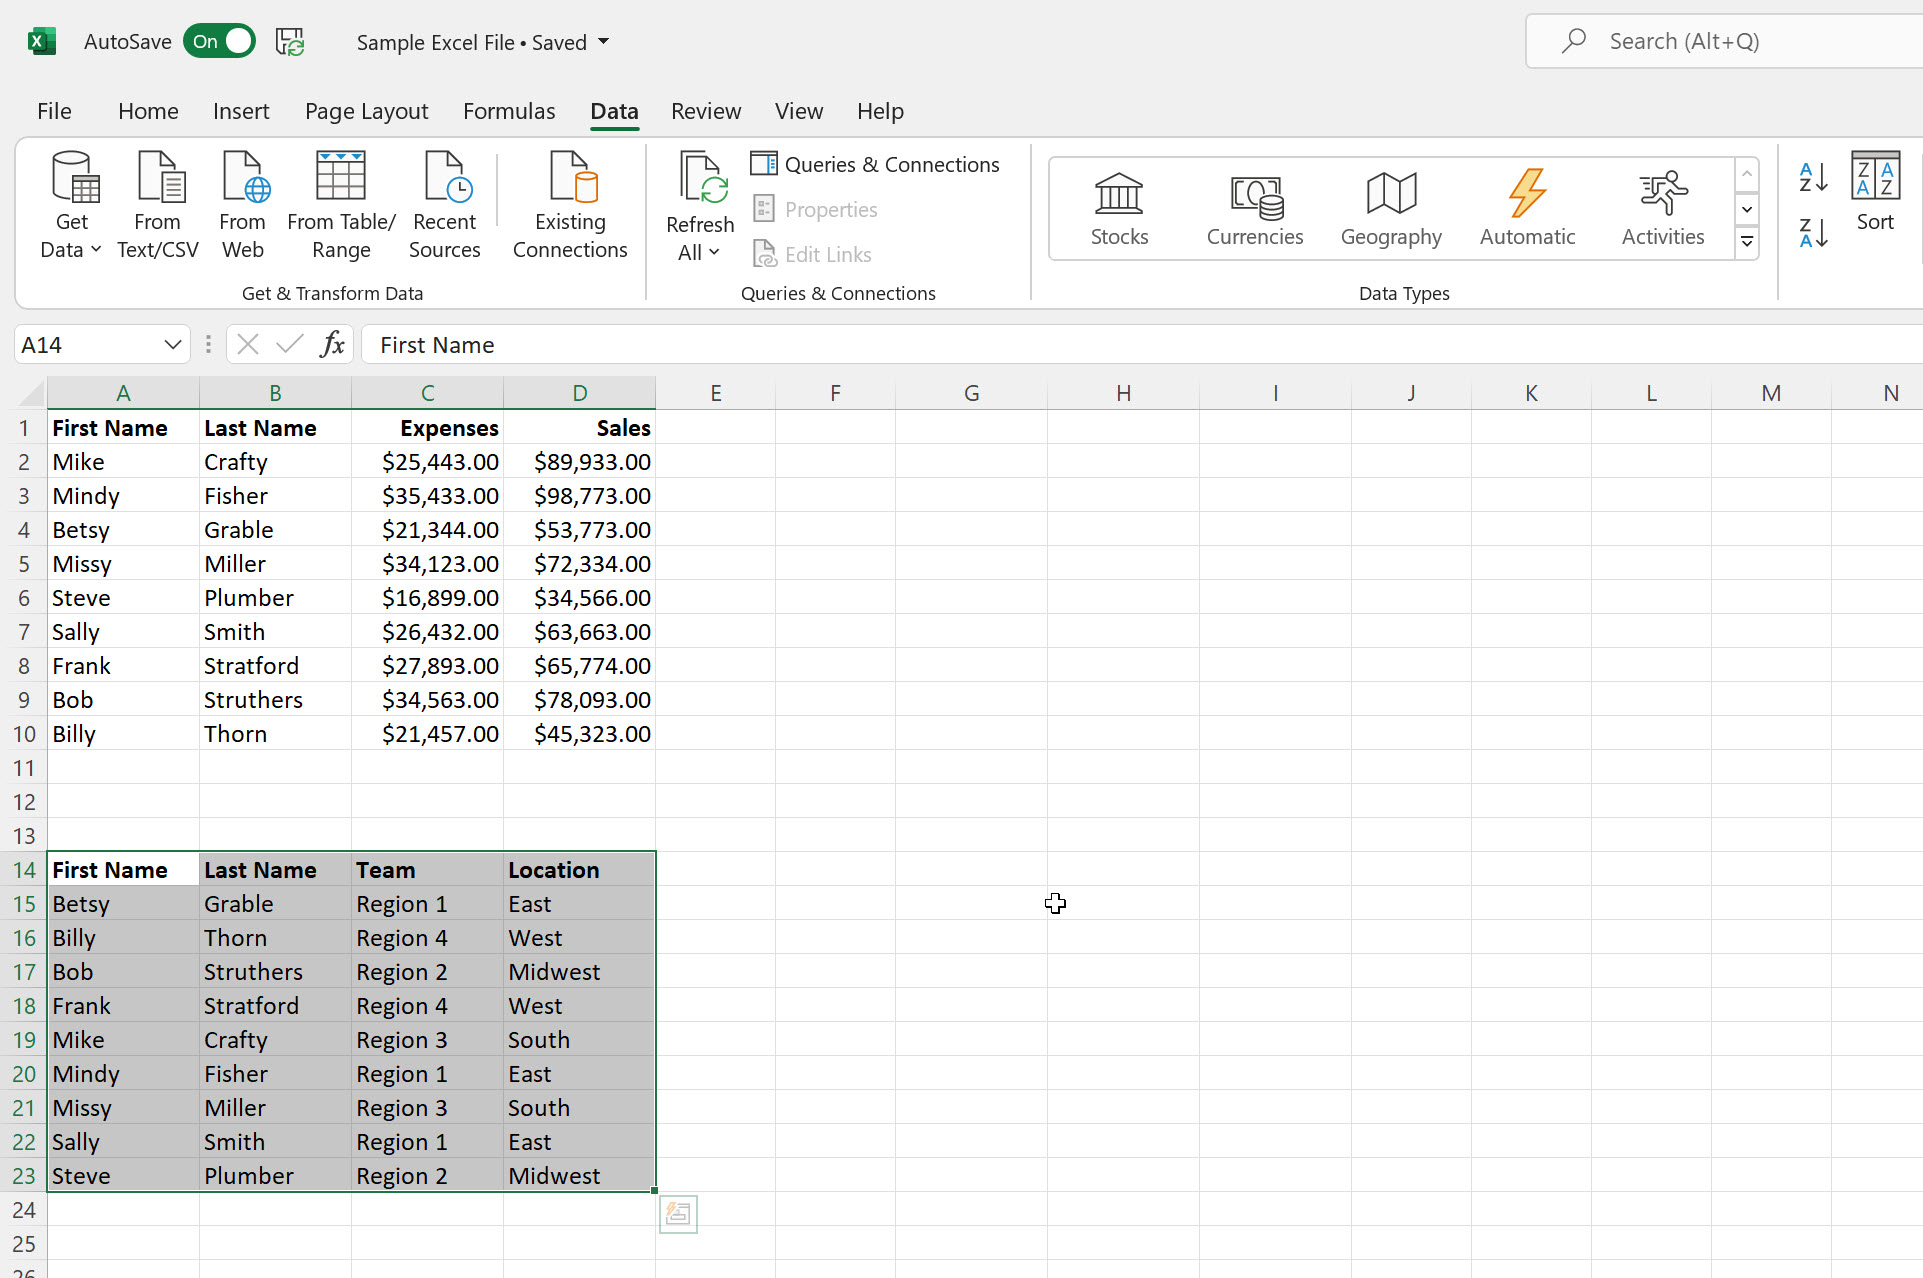 How to alphabetize data in an Excel spreadsheet